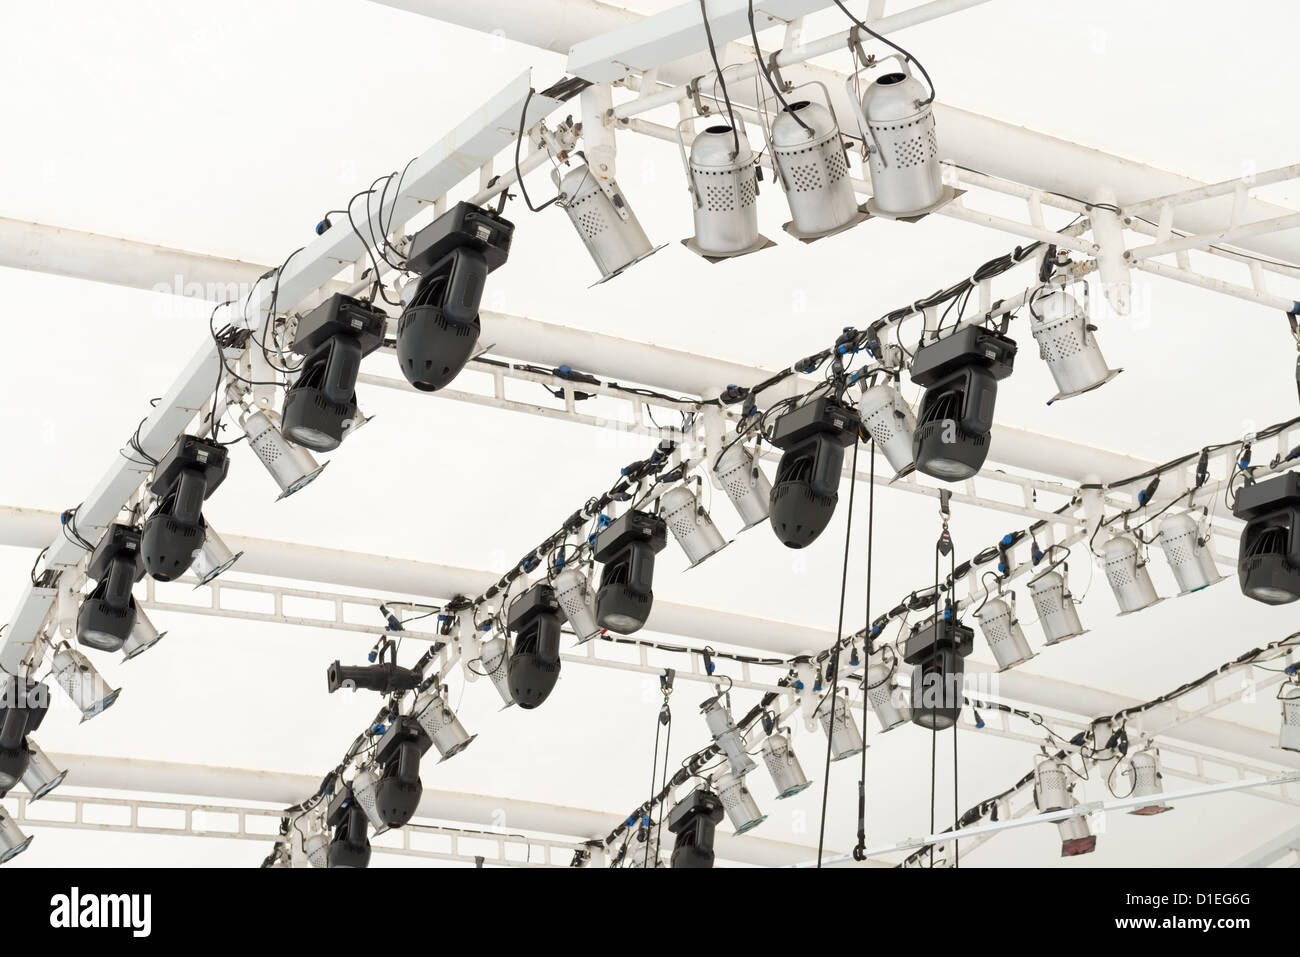 Lighting equipment with spotlights and floodlights under roof Stock Photo